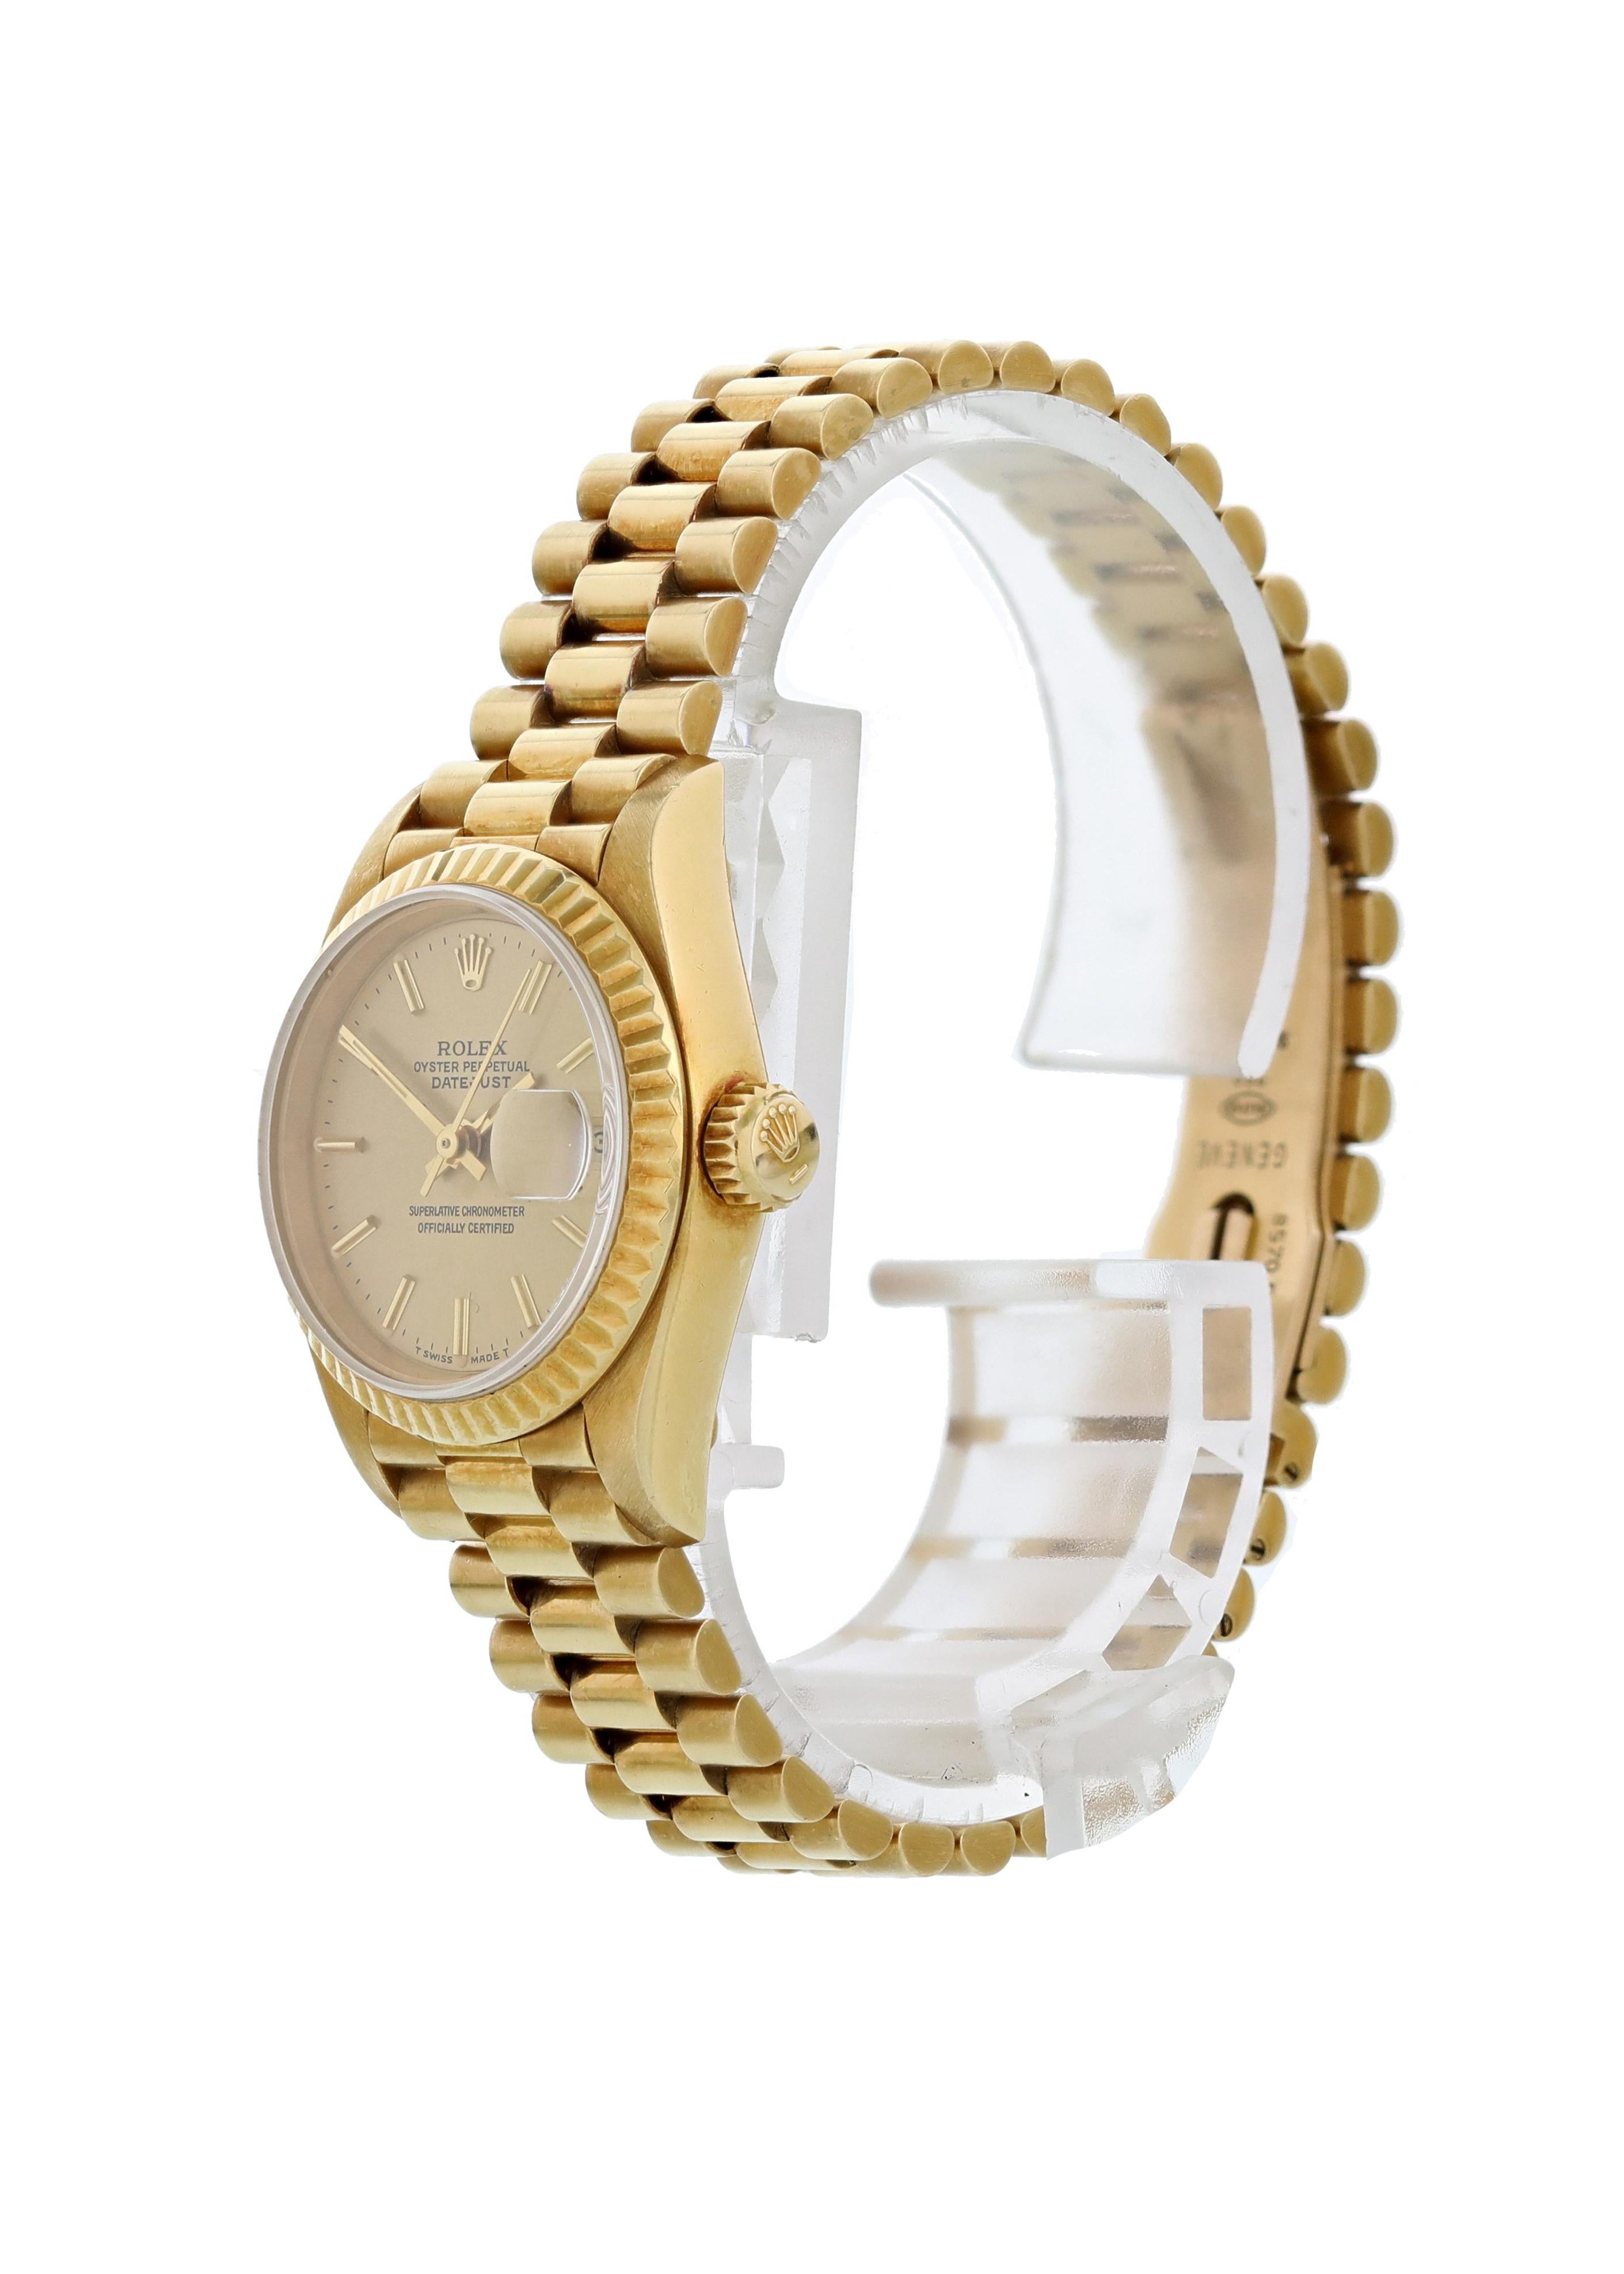 Rolex Datejust 69178 18K Yellow Gold Ladies Watch. 26mm 18K yellow gold case with a fluted bezel. Champagne dial with gold hands and gold tone indexes hour markers.  Quickset date display at 3 o'clock position. 18K yellow gold bracelet with 18K